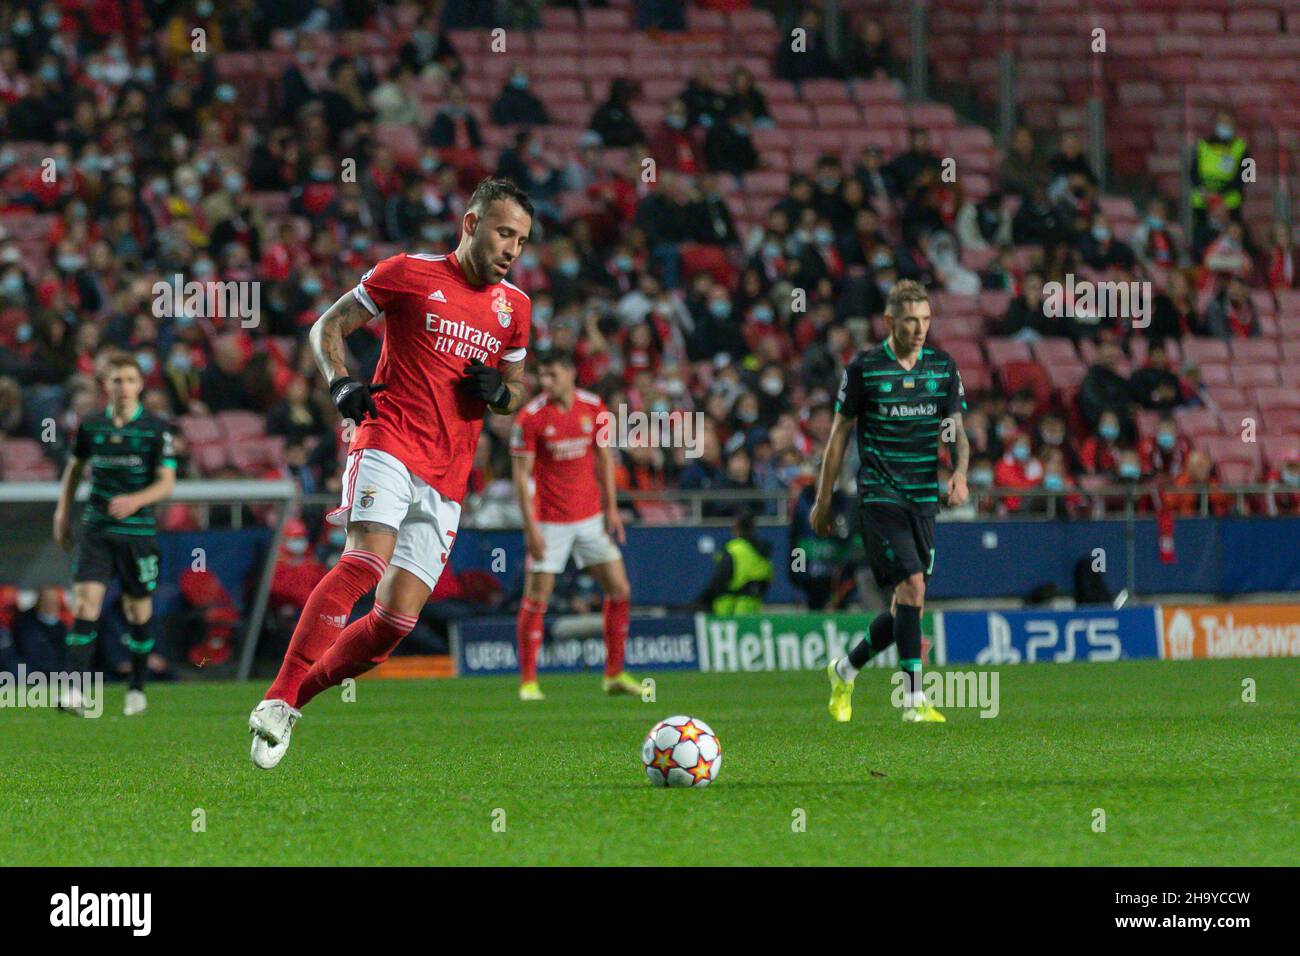 December 08, 2021. Lisbon, Portugal. Benfica's defender from Argentina Nicolas Otamendi (30) in action during the game of the 6th round of Group E for the UEFA Champions League, Benfica vs Dynamo Kiev Credit: Alexandre de Sousa/Alamy Live News Stock Photo